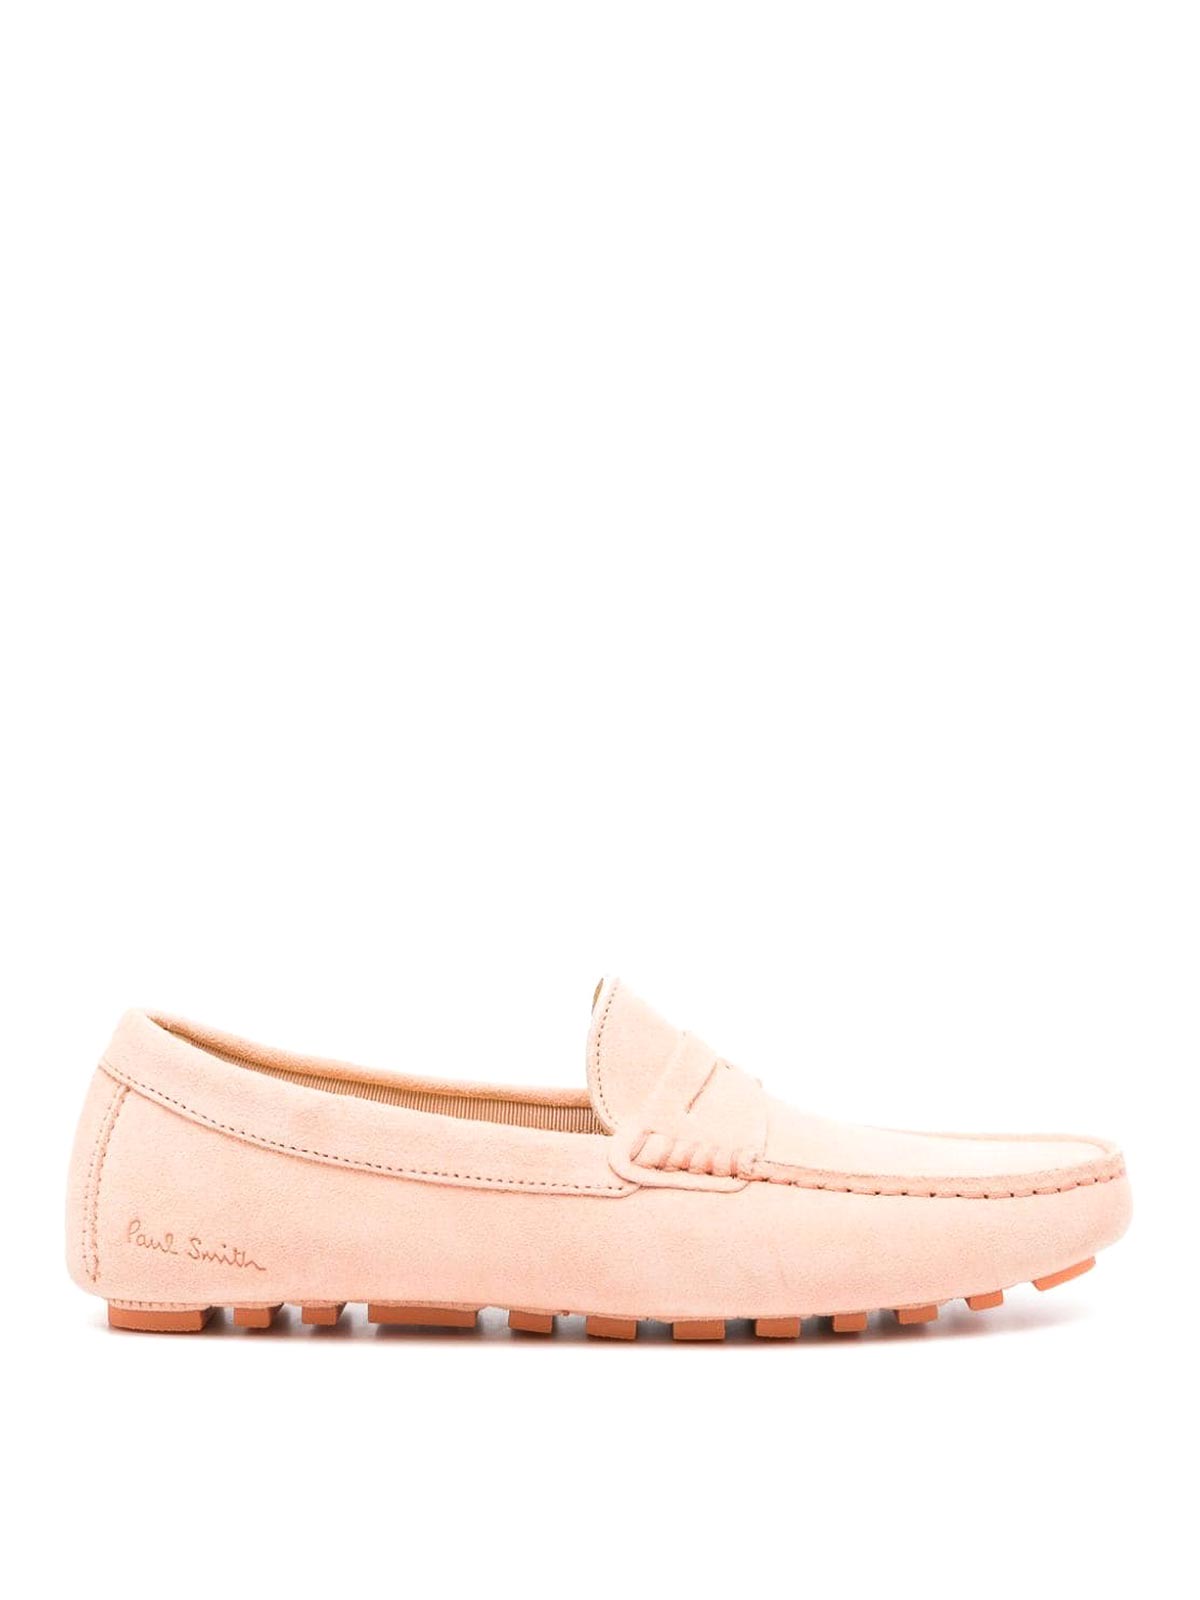 Paul Smith Suede Loafers In Naranja